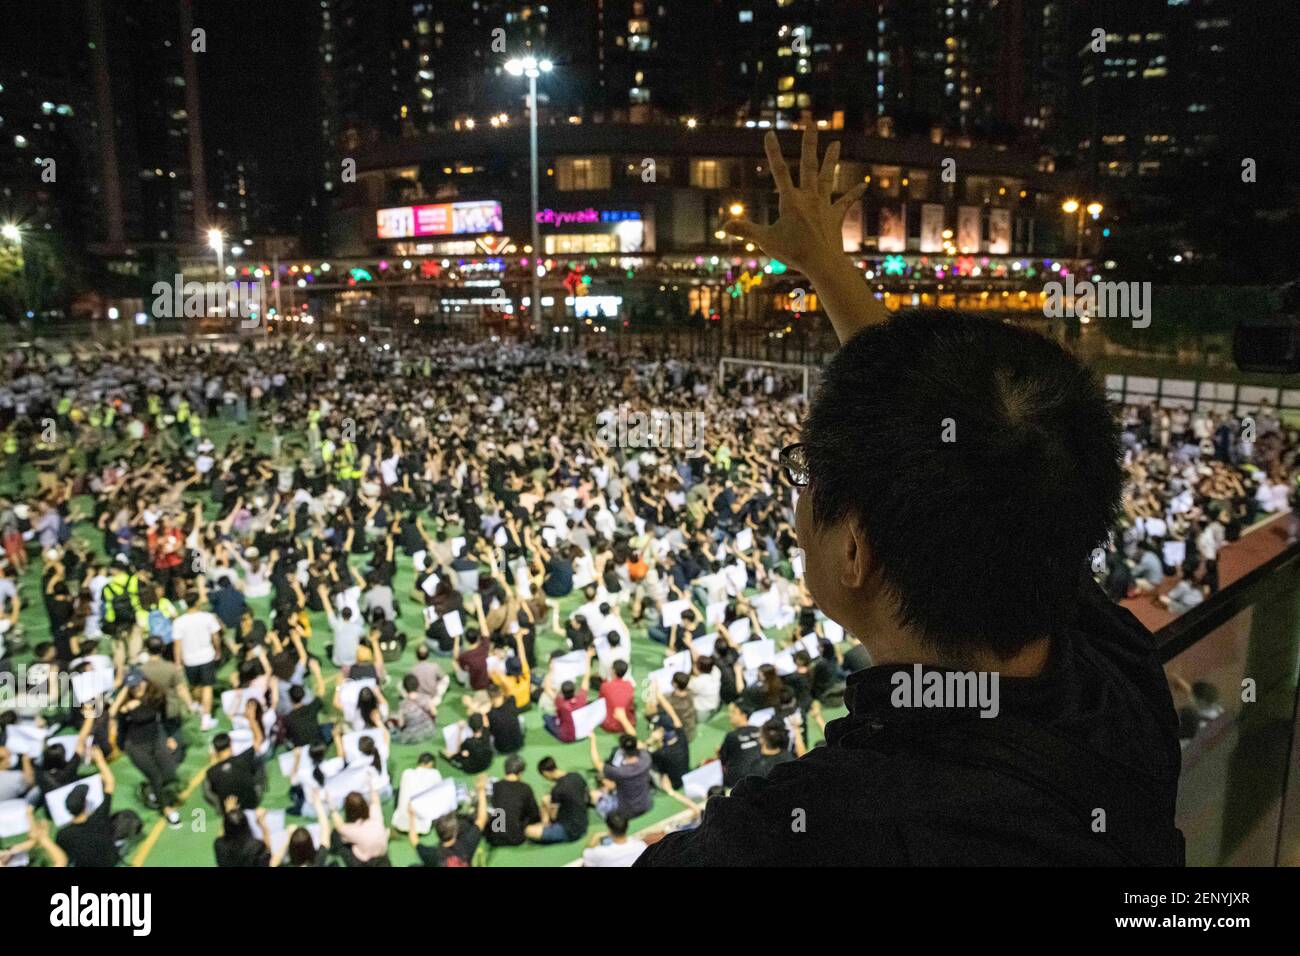 A Hongkonger chants 'five demands, not one less' to a growing crowd at Sha Tsui Road Playground. Hundreds marched through Hong Kong's Tsuen Wan district on Oct. 2, 2019, after police hit an 18-year-old pro-democracy protester with live ammunition during clashes on Oct. 1. (Photo by Alejandro Alvarez/Sipa USA) Stock Photo